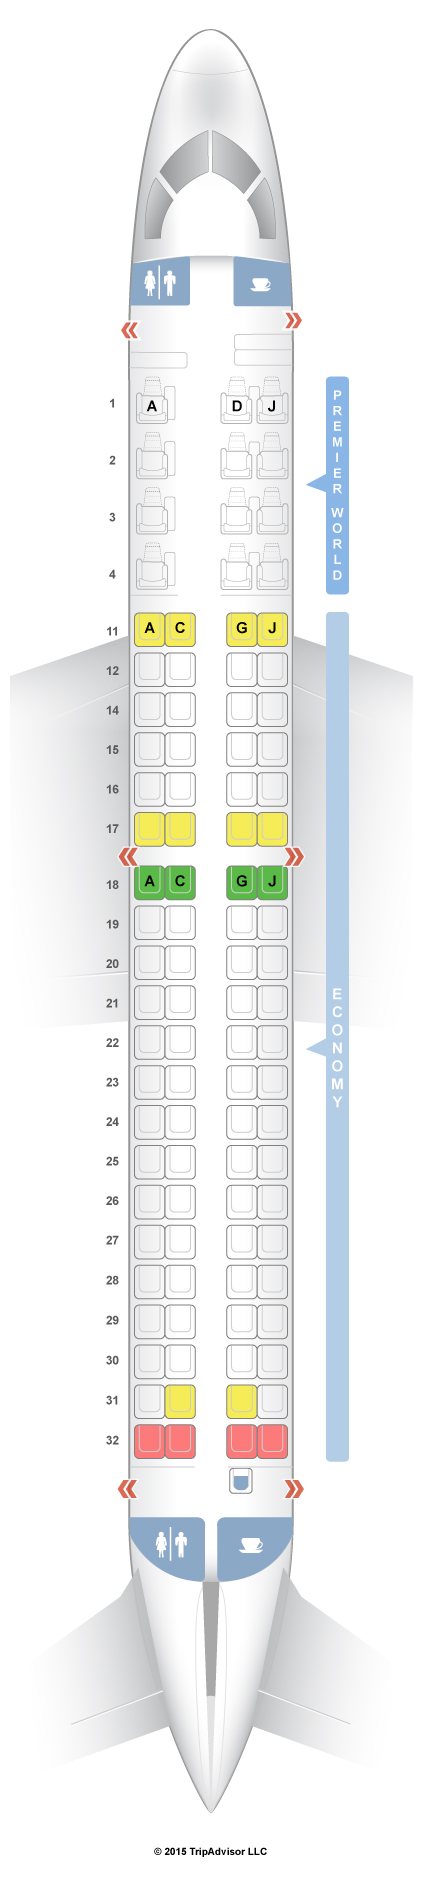 Embraer Seating Chart